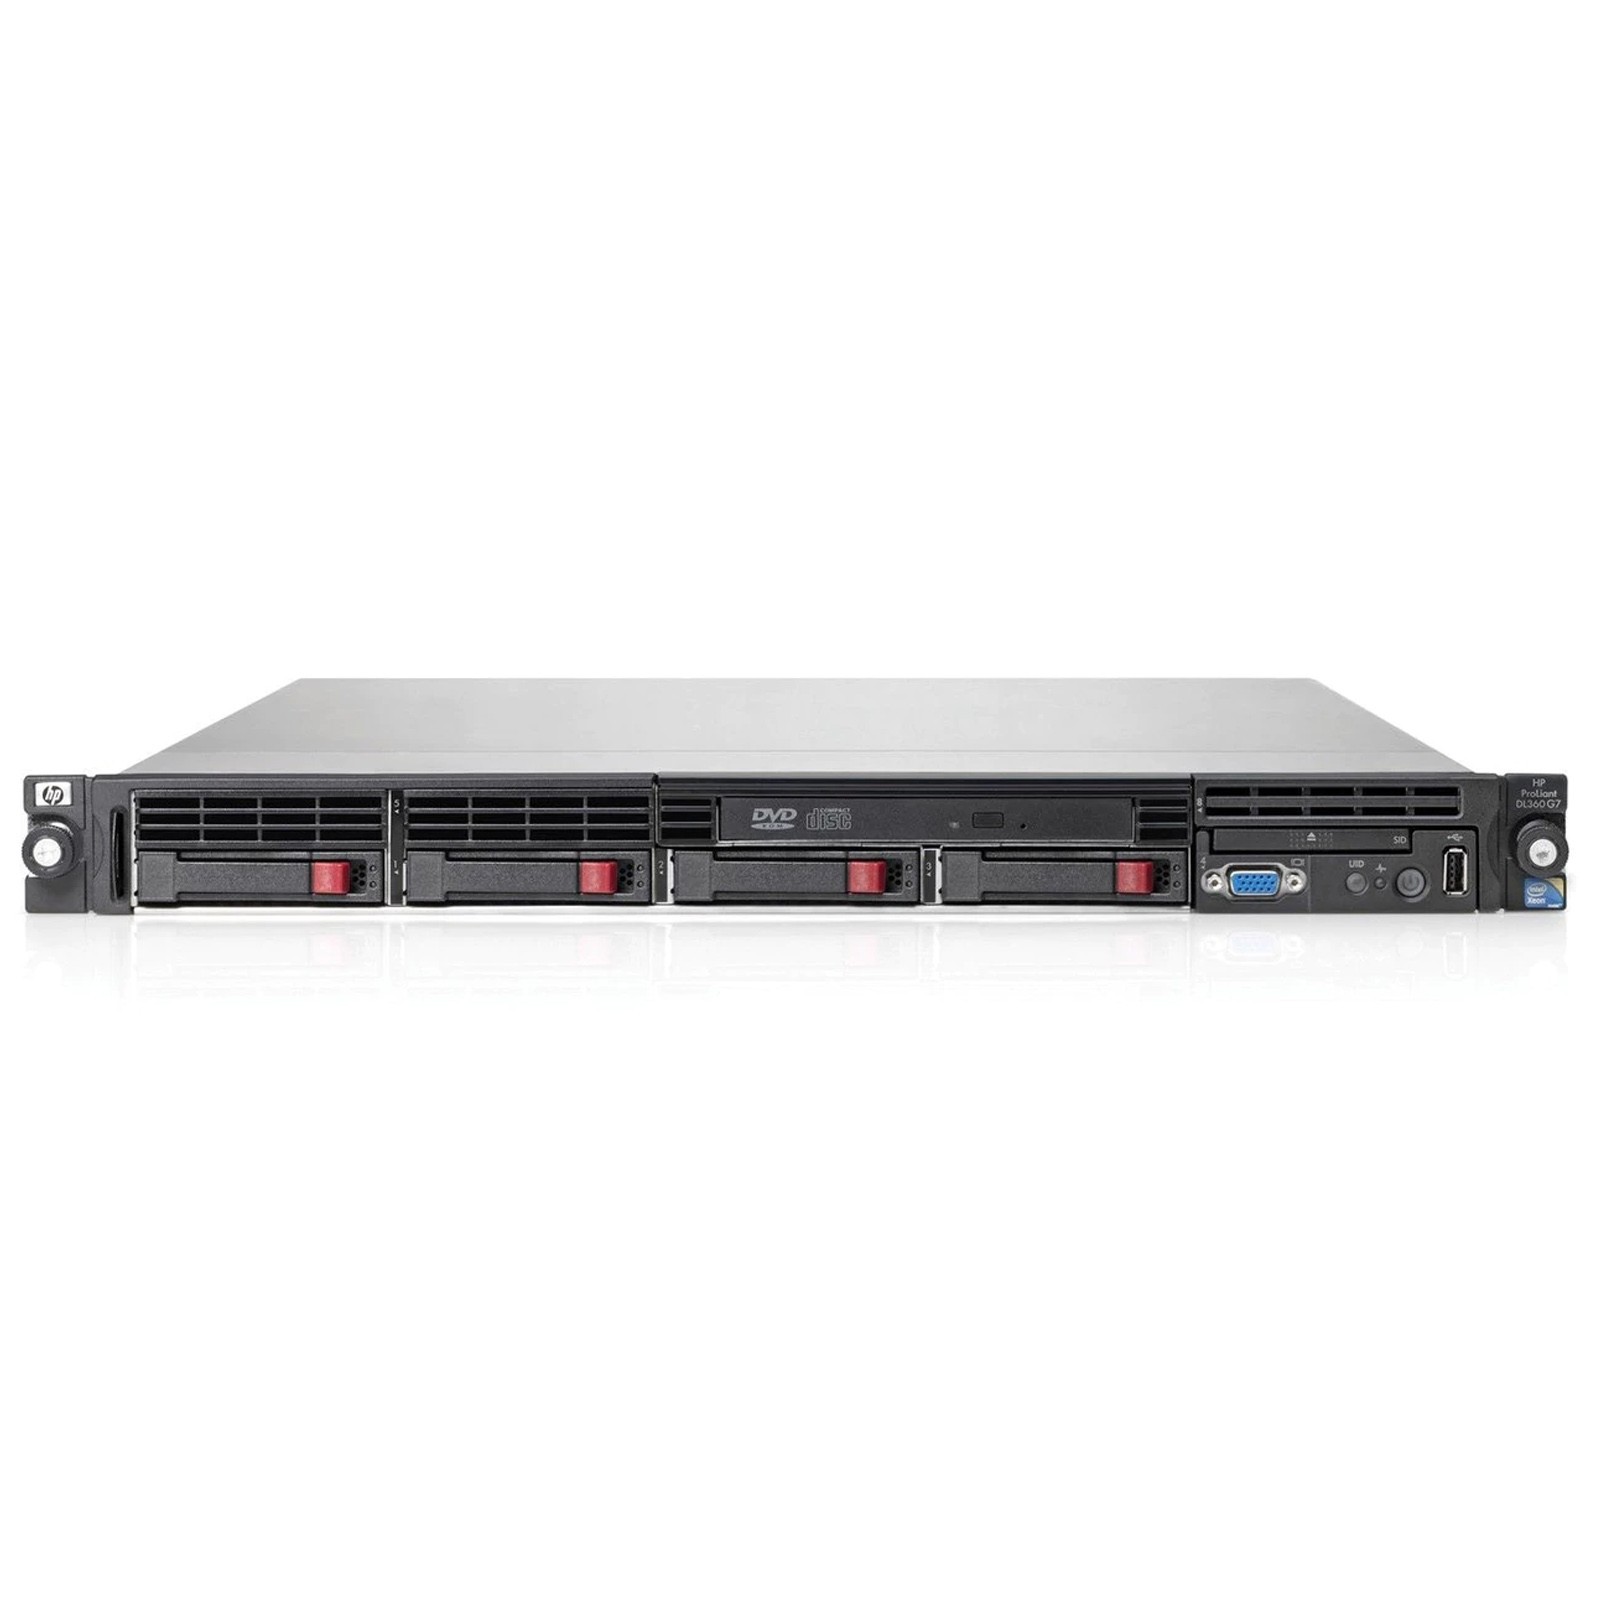 DRIVER FOR HP PROLIANT DL360 G3 BASE SYSTEM DEVICE